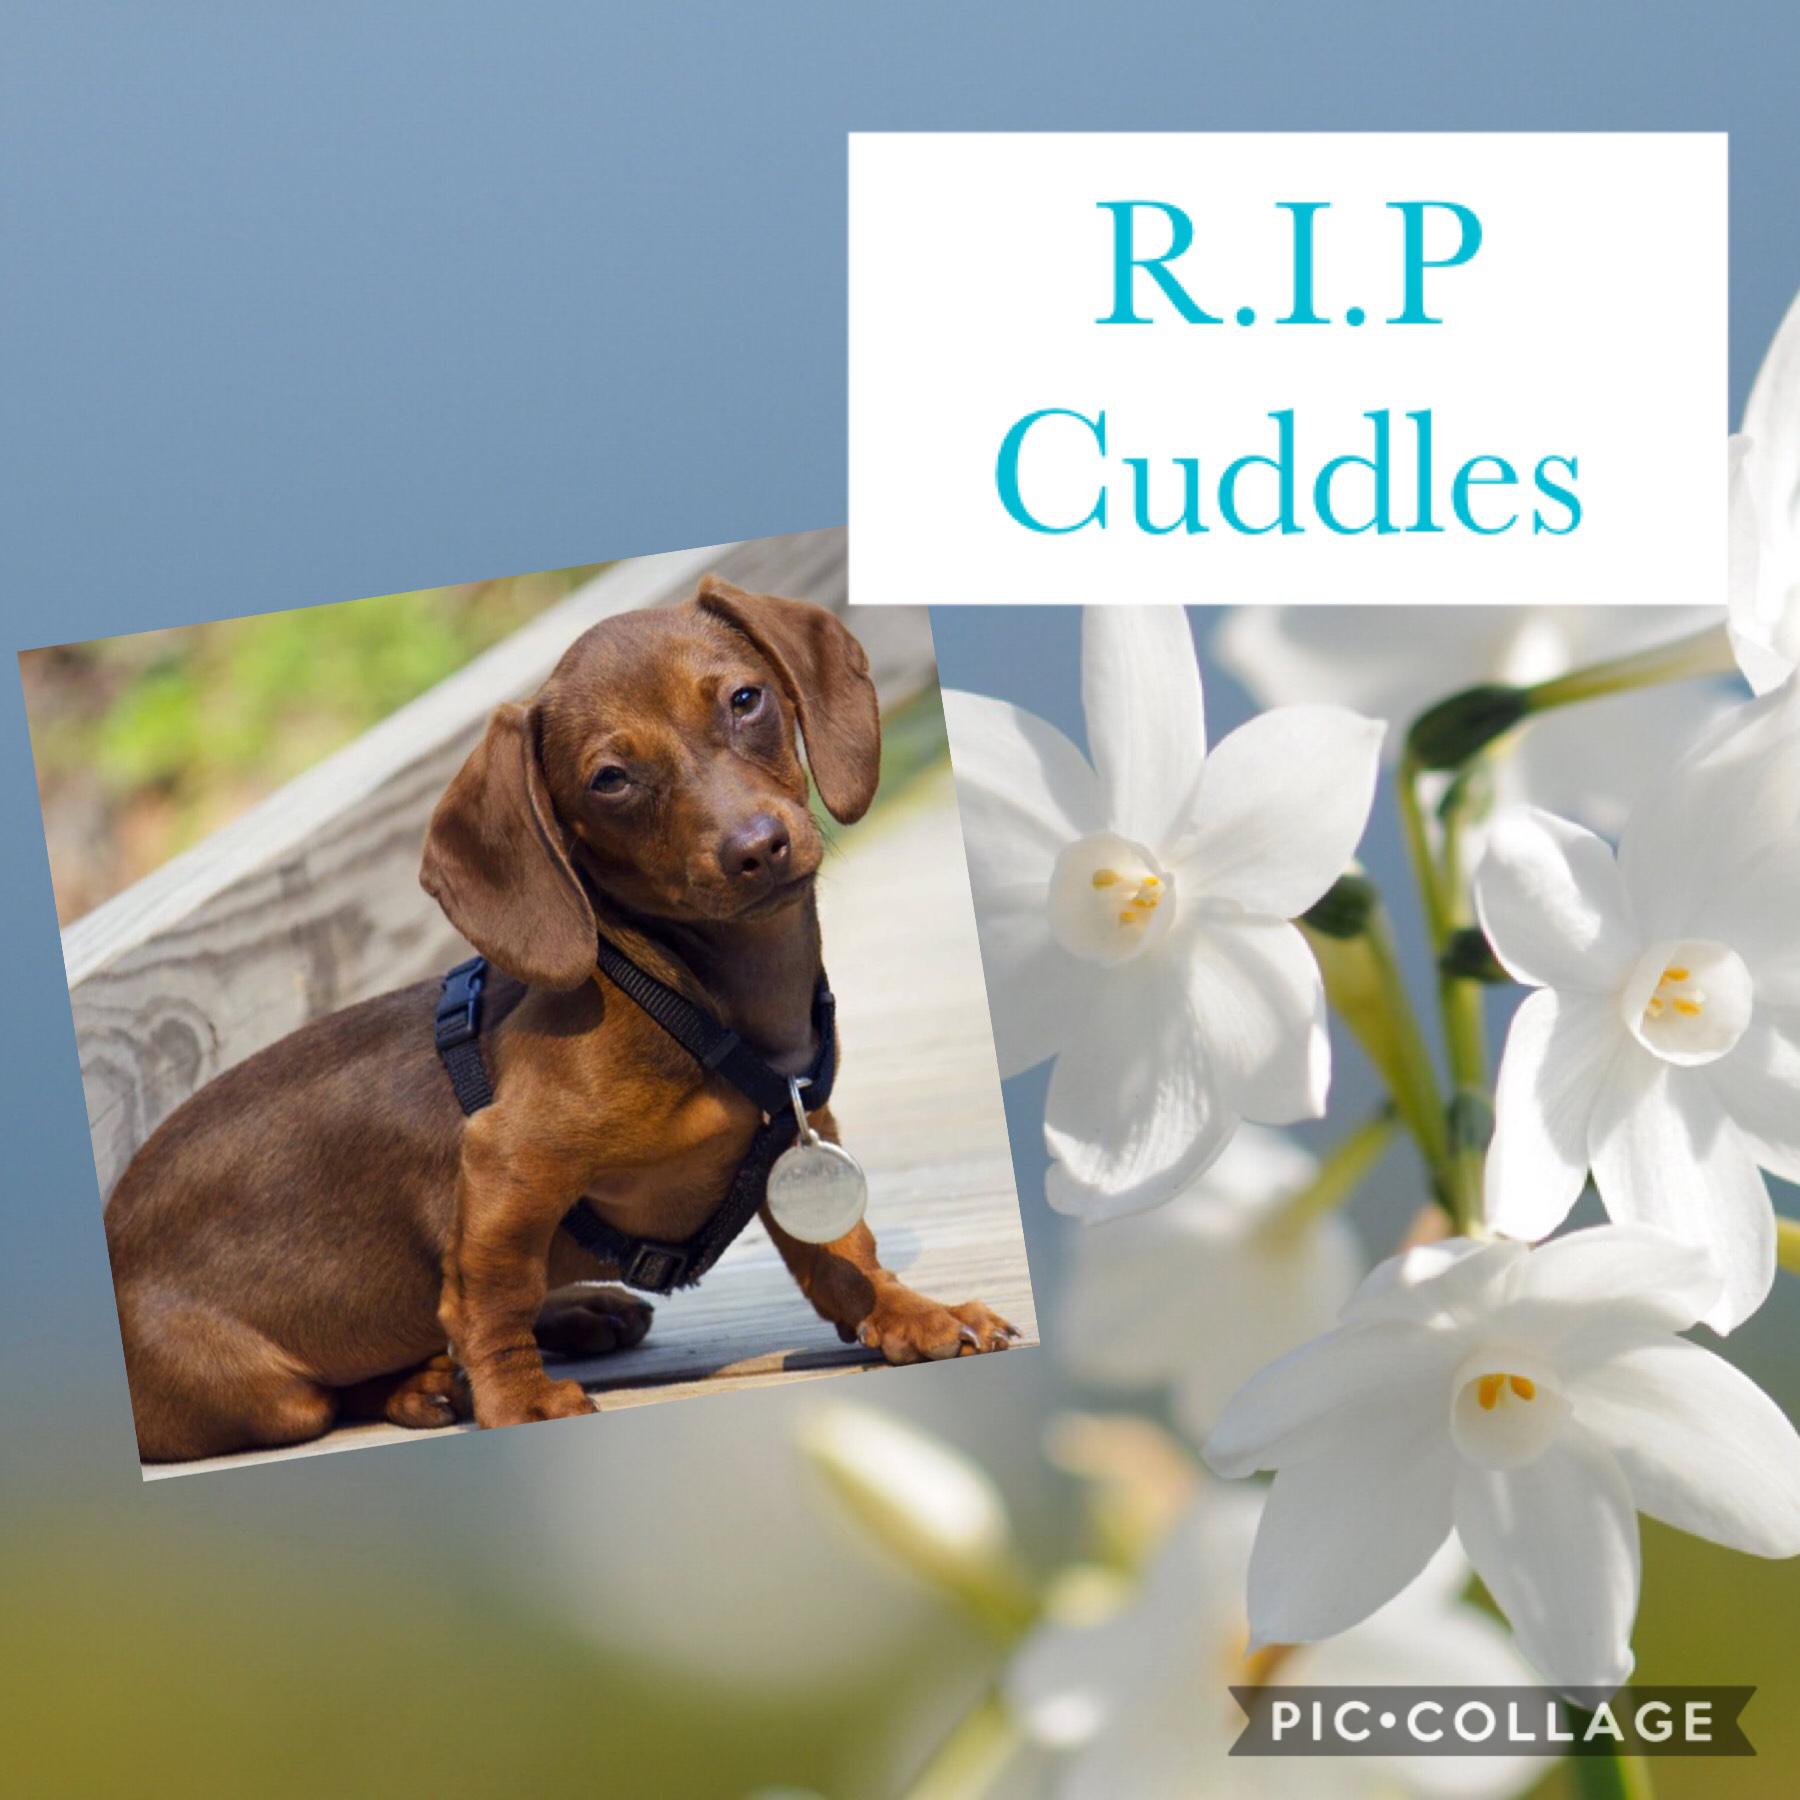 Rest In Peace Cuddles